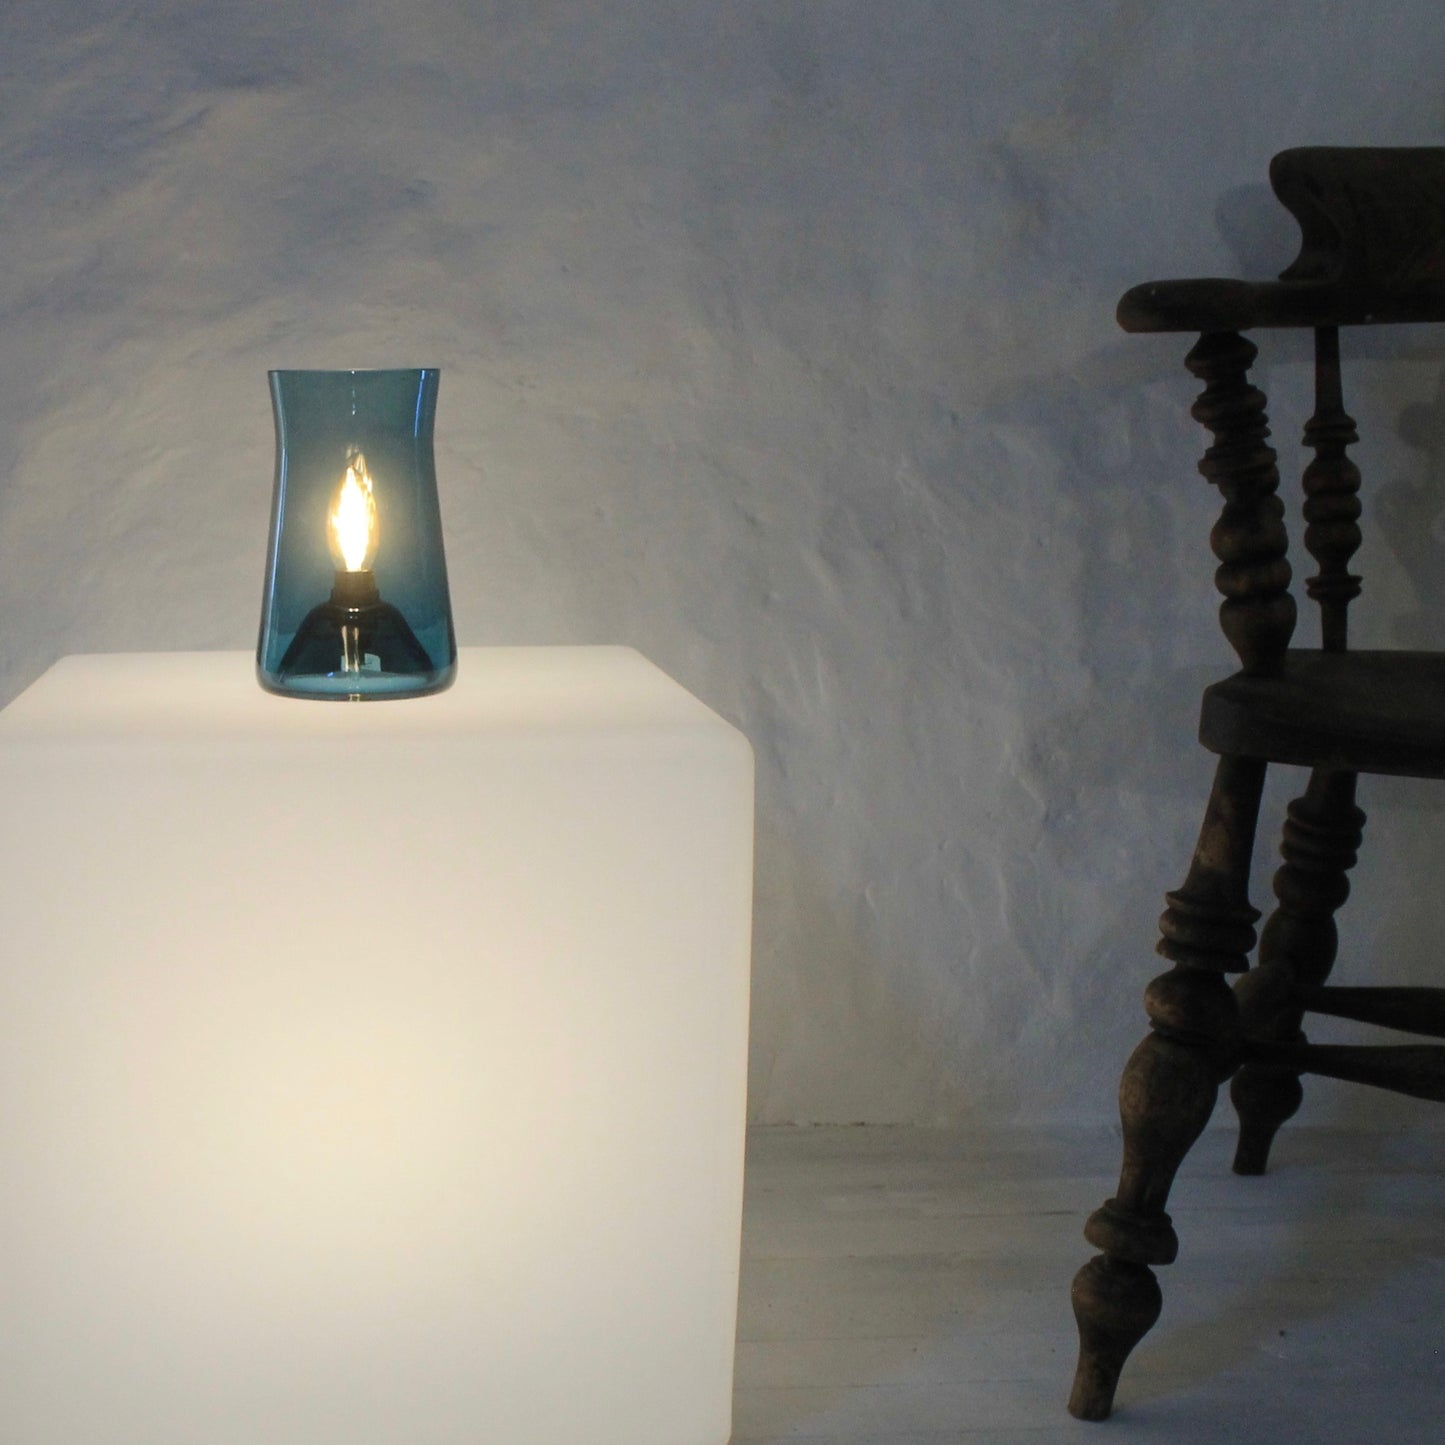 Waisted Table Lamp. Simple elegant table lighting. Teal Blue glass lamp. Hand made in UK